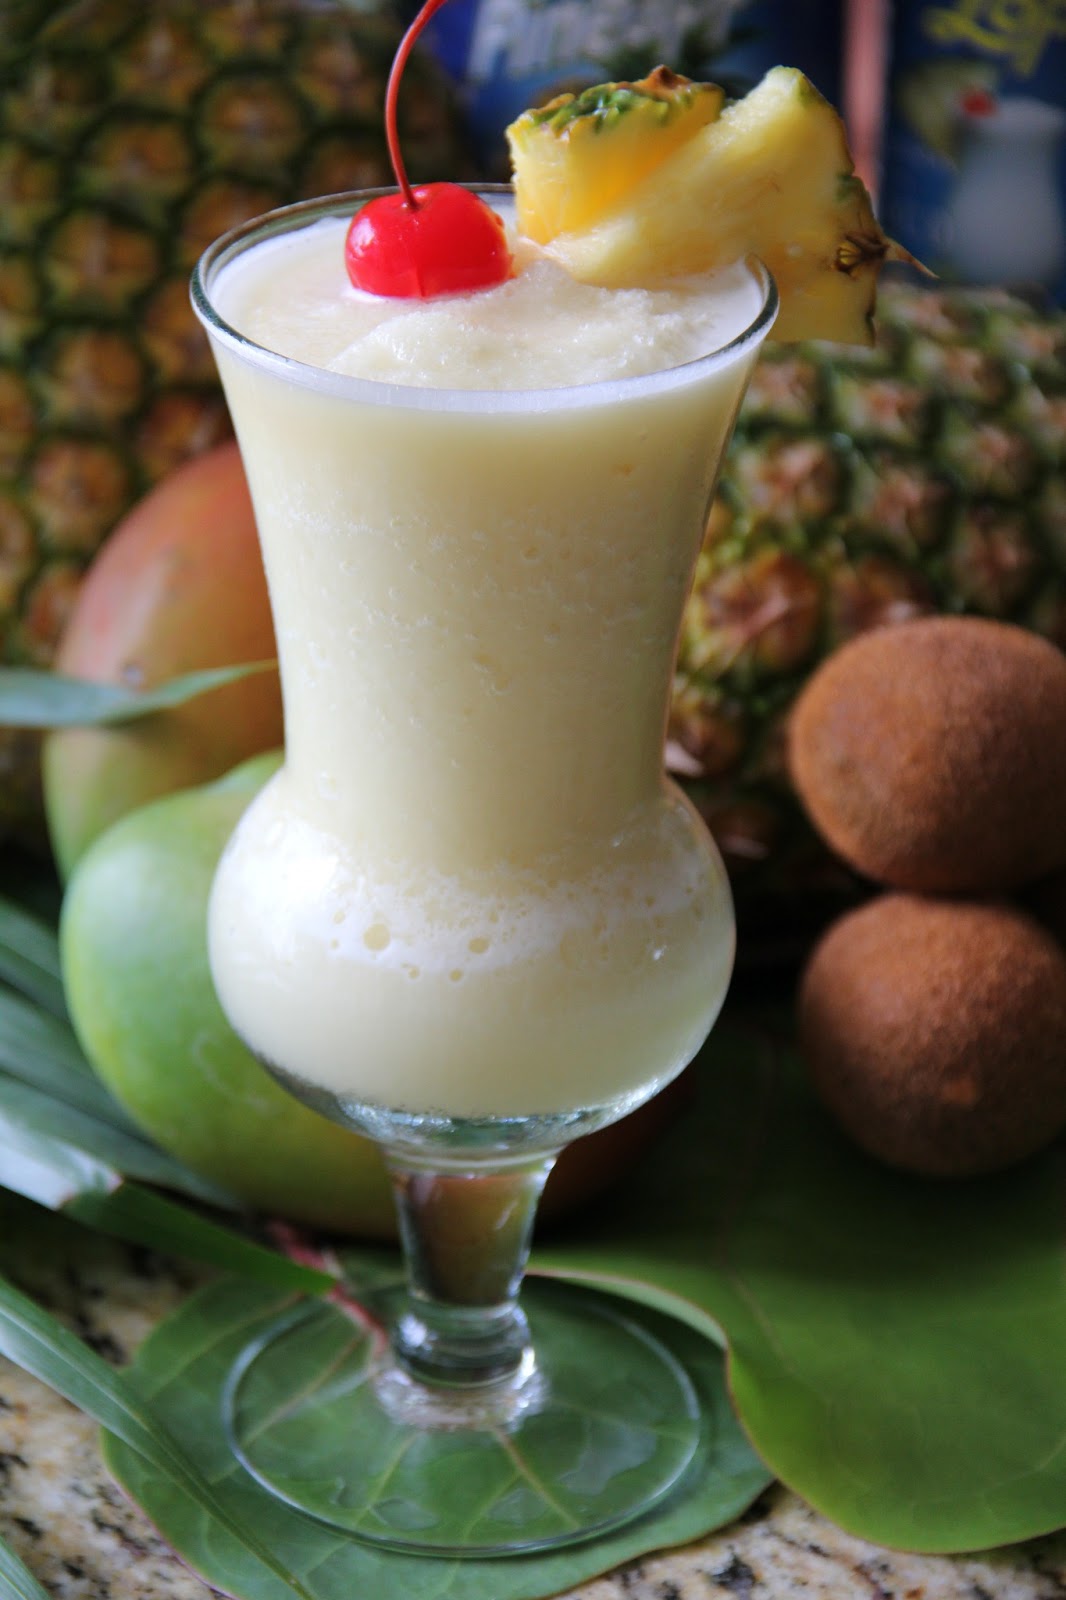 Fancy Food & Culinary Products blog: Who invented the Piña Colada?